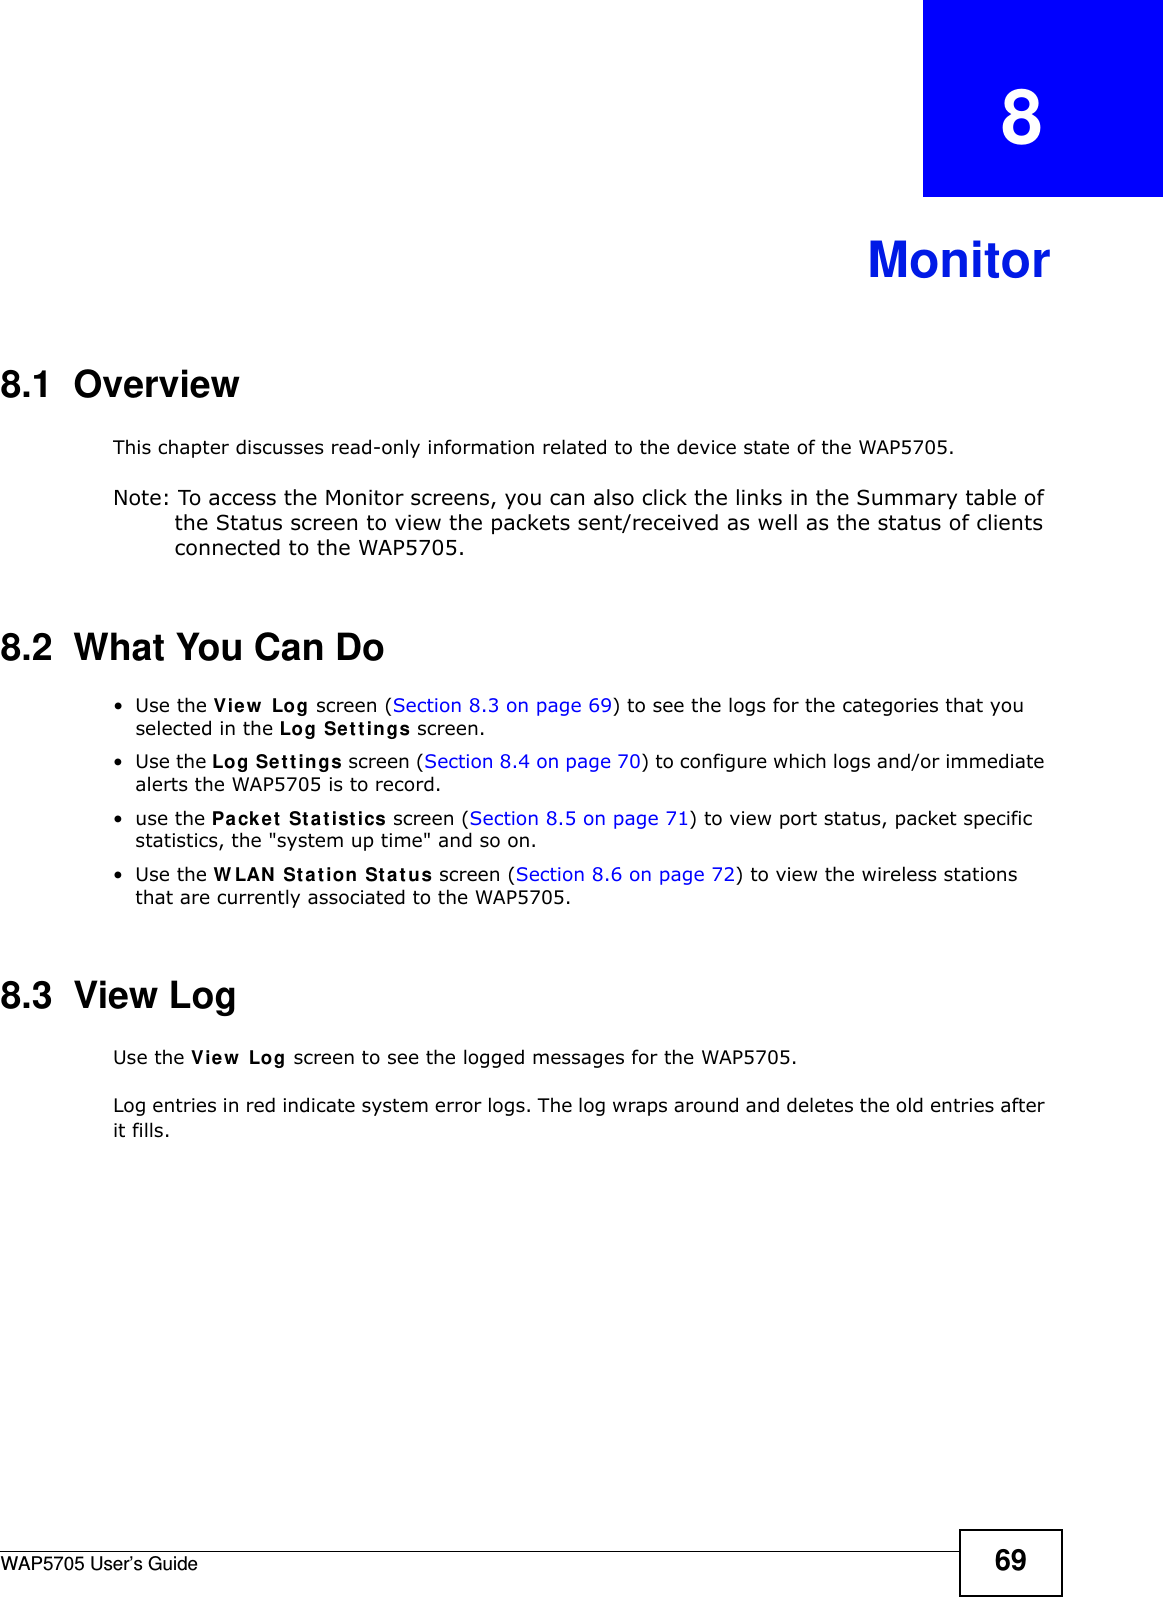 WAP5705 User’s Guide 69CHAPTER   8Monitor8.1  OverviewThis chapter discusses read-only information related to the device state of the WAP5705. Note: To access the Monitor screens, you can also click the links in the Summary table of the Status screen to view the packets sent/received as well as the status of clients connected to the WAP5705.8.2  What You Can Do•Use the Vie w  Log screen (Section 8.3 on page 69) to see the logs for the categories that you selected in the Log Set t ings screen.•Use the Log Set tings screen (Section 8.4 on page 70) to configure which logs and/or immediate alerts the WAP5705 is to record.•use the Pa cket  St a t istics screen (Section 8.5 on page 71) to view port status, packet specific statistics, the &quot;system up time&quot; and so on.•Use the W LAN St a t ion  St a t us screen (Section 8.6 on page 72) to view the wireless stations that are currently associated to the WAP5705.8.3  View LogUse the View  Log screen to see the logged messages for the WAP5705. Log entries in red indicate system error logs. The log wraps around and deletes the old entries after it fills. 